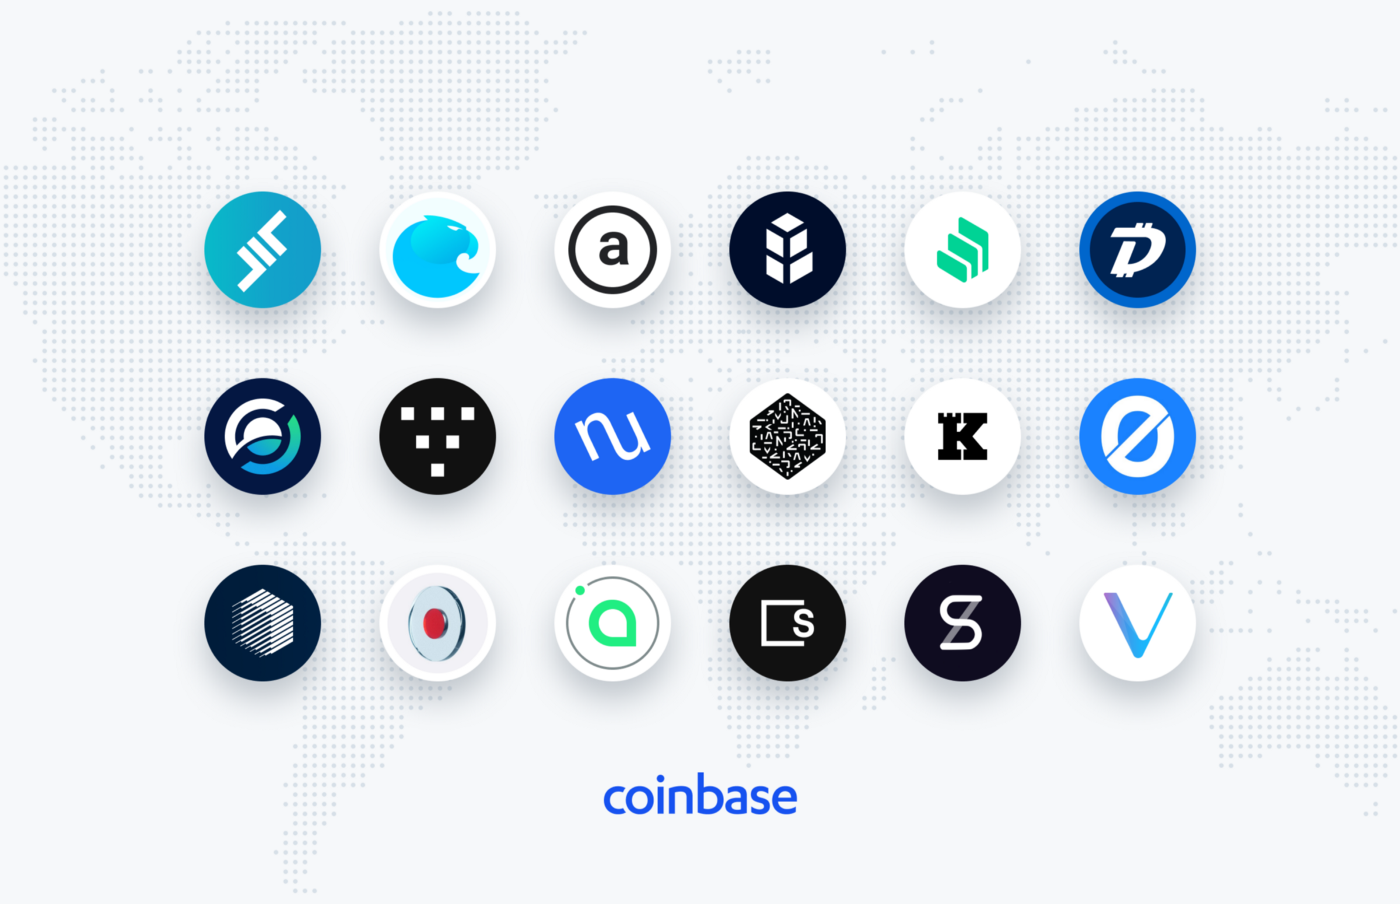 Coinbase continues to explore support for new digital assets